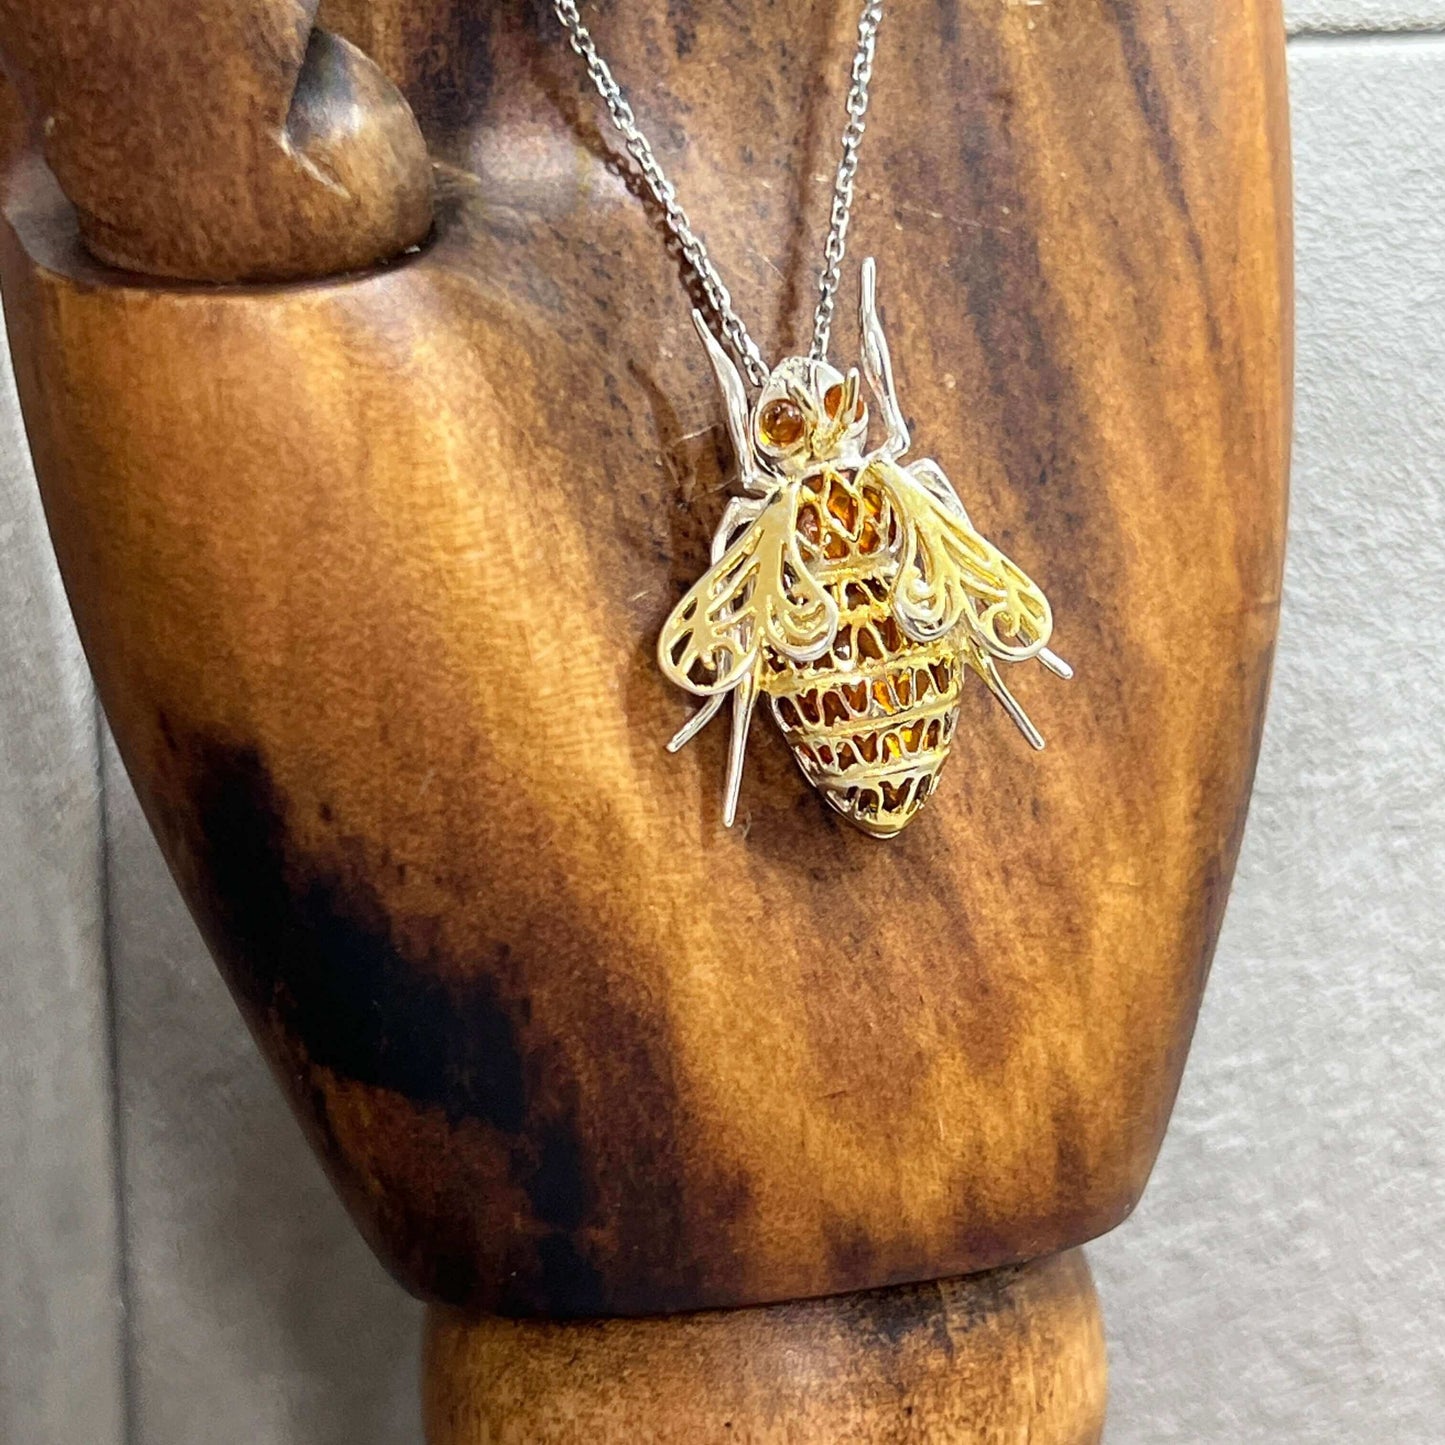 Baltic Amber Fly Pendant In Sterling Silver & 14 Carat Gold - Twelve Silver Trees